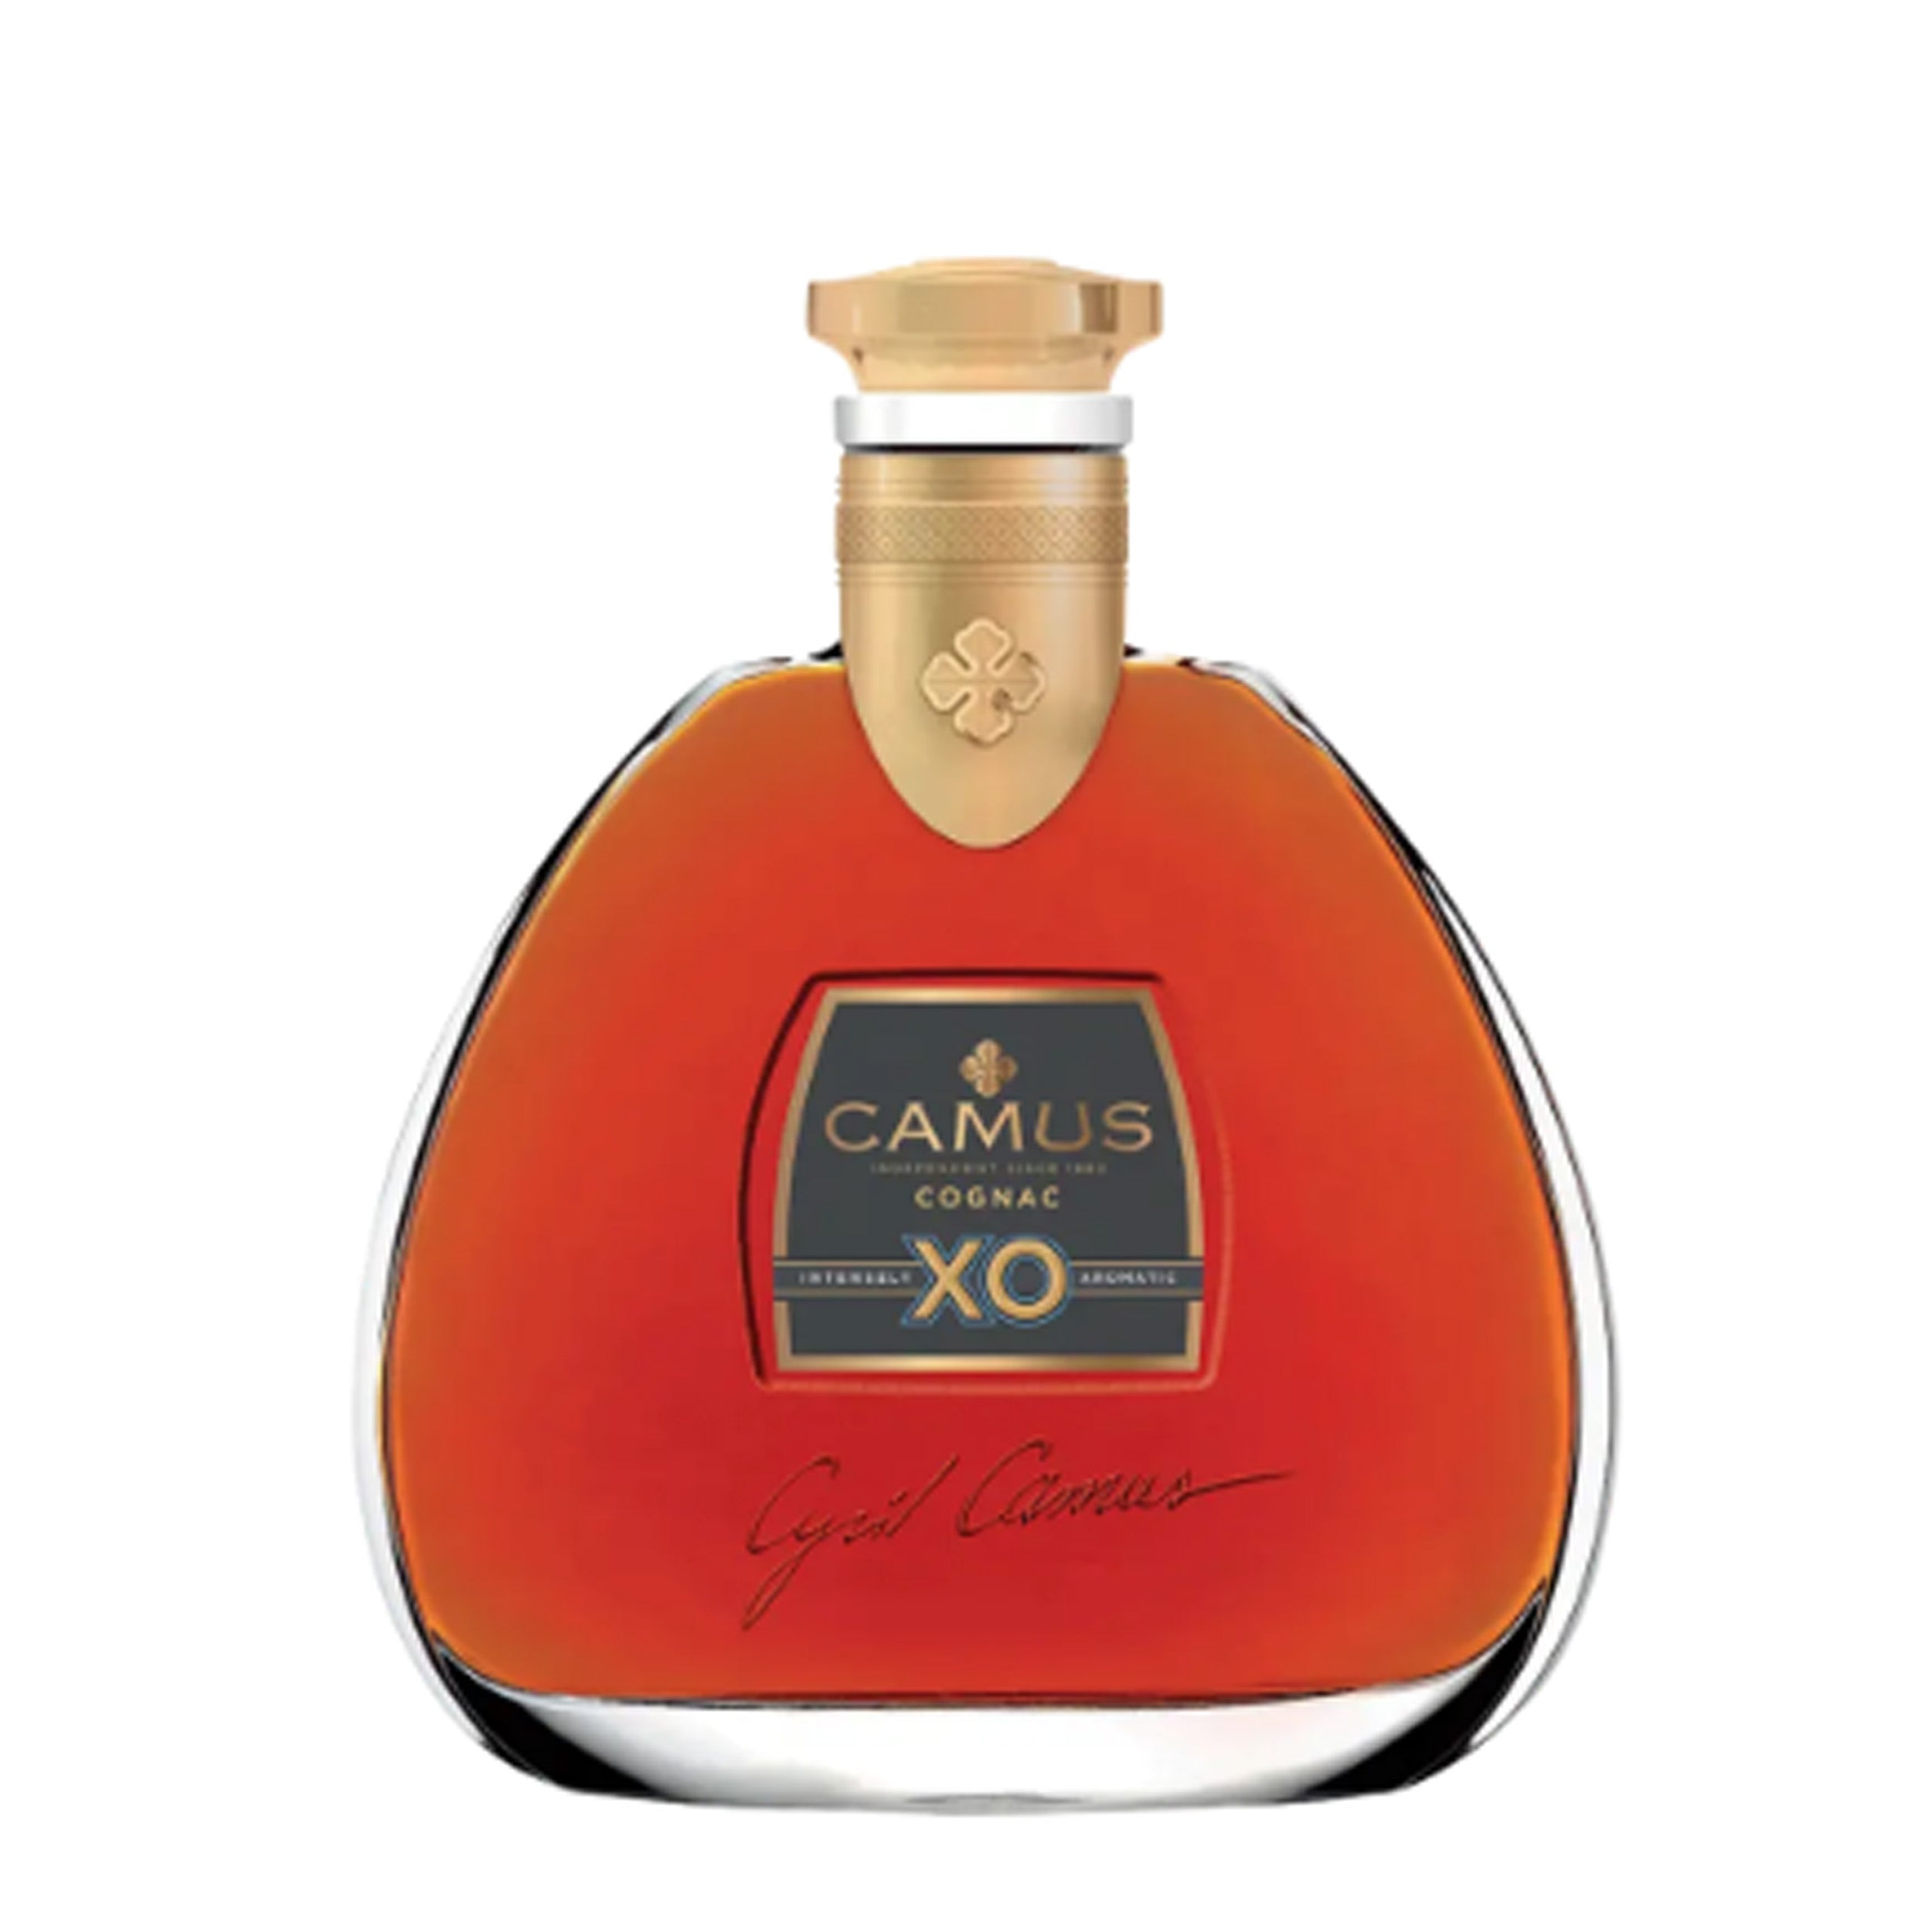 Cognac: Ageing gracefully - Decanter